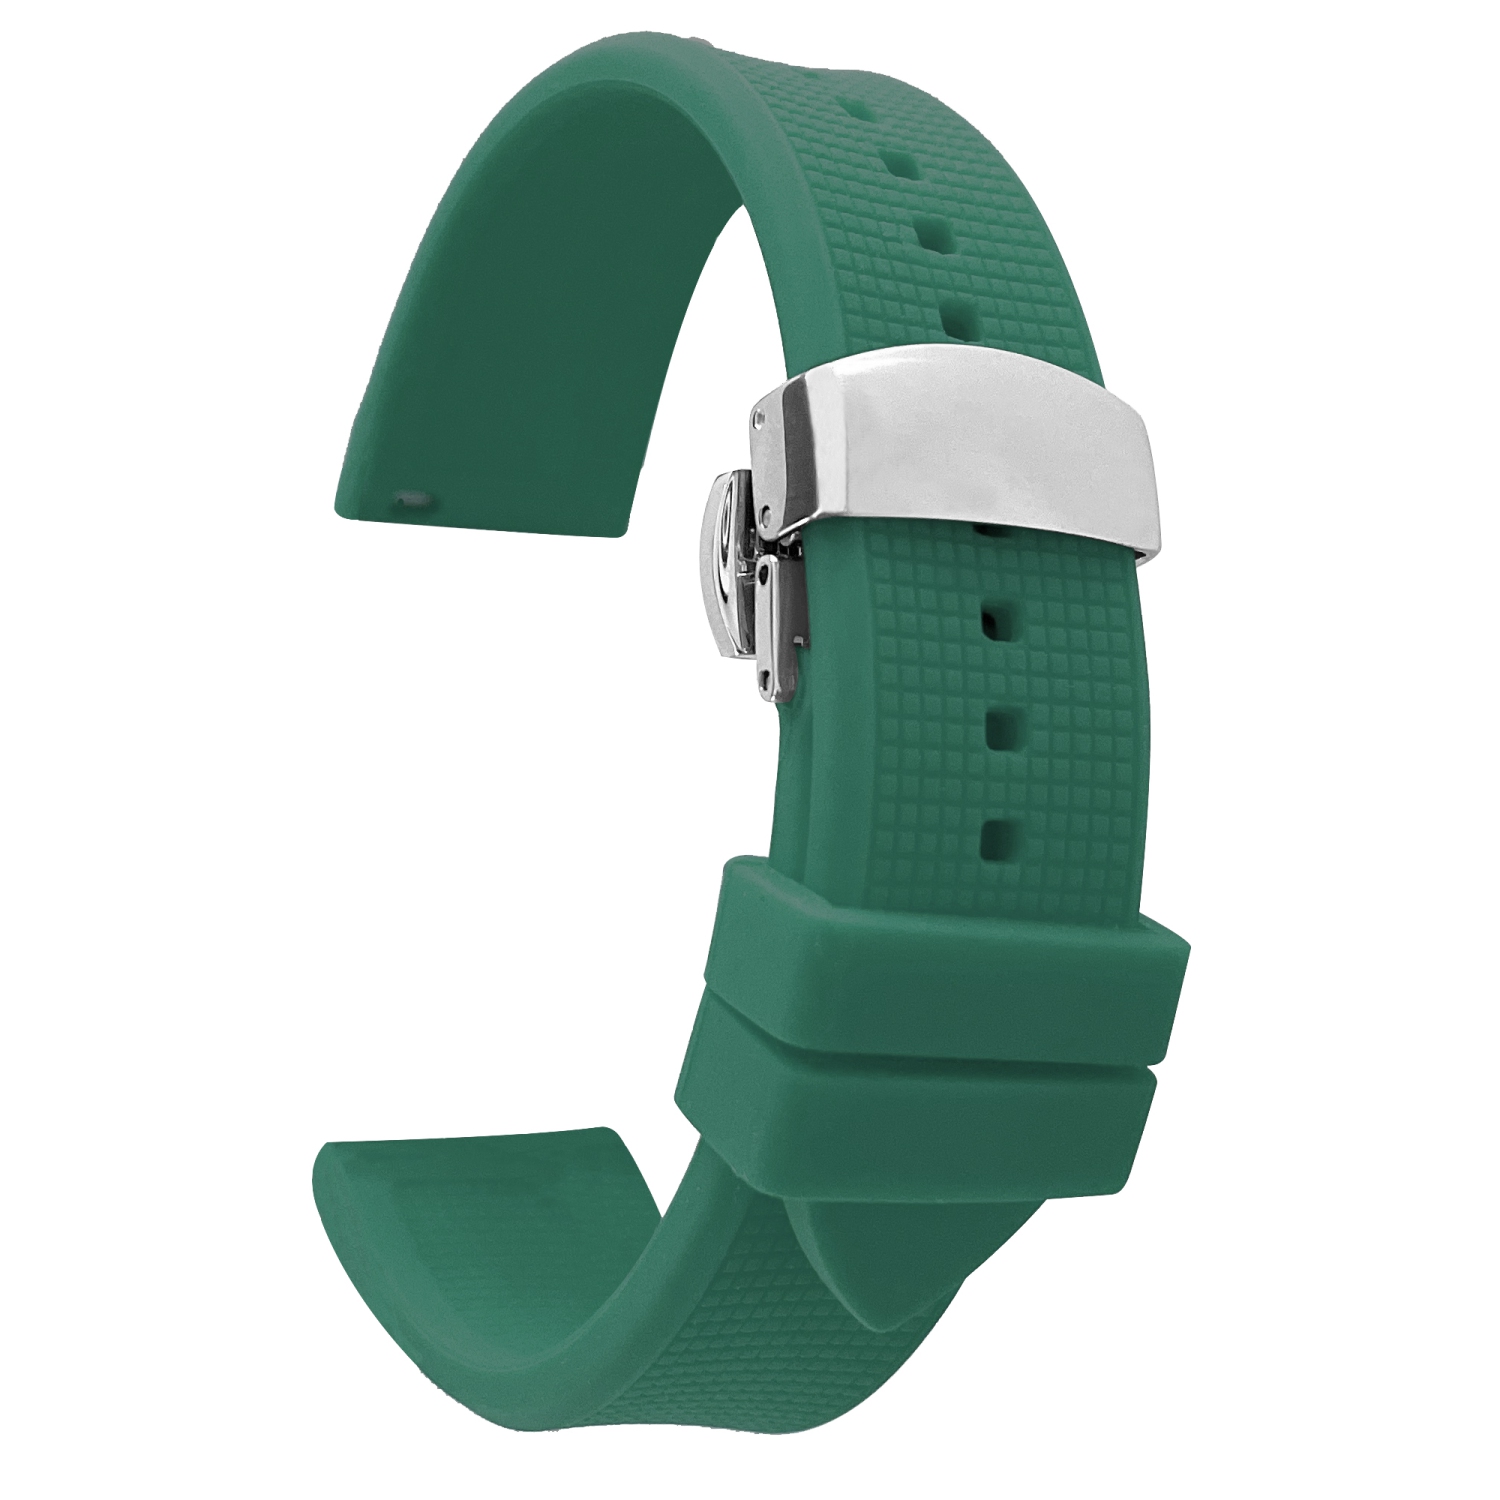 Bandini Waterproof Soft Rubber Silicone Deployment Smart Watch Band Strap For Samsung Galaxy Watch 46mm, Galaxy Watch 3 (45mm), Gear S3 Classic & Frontier - 22mm, Green